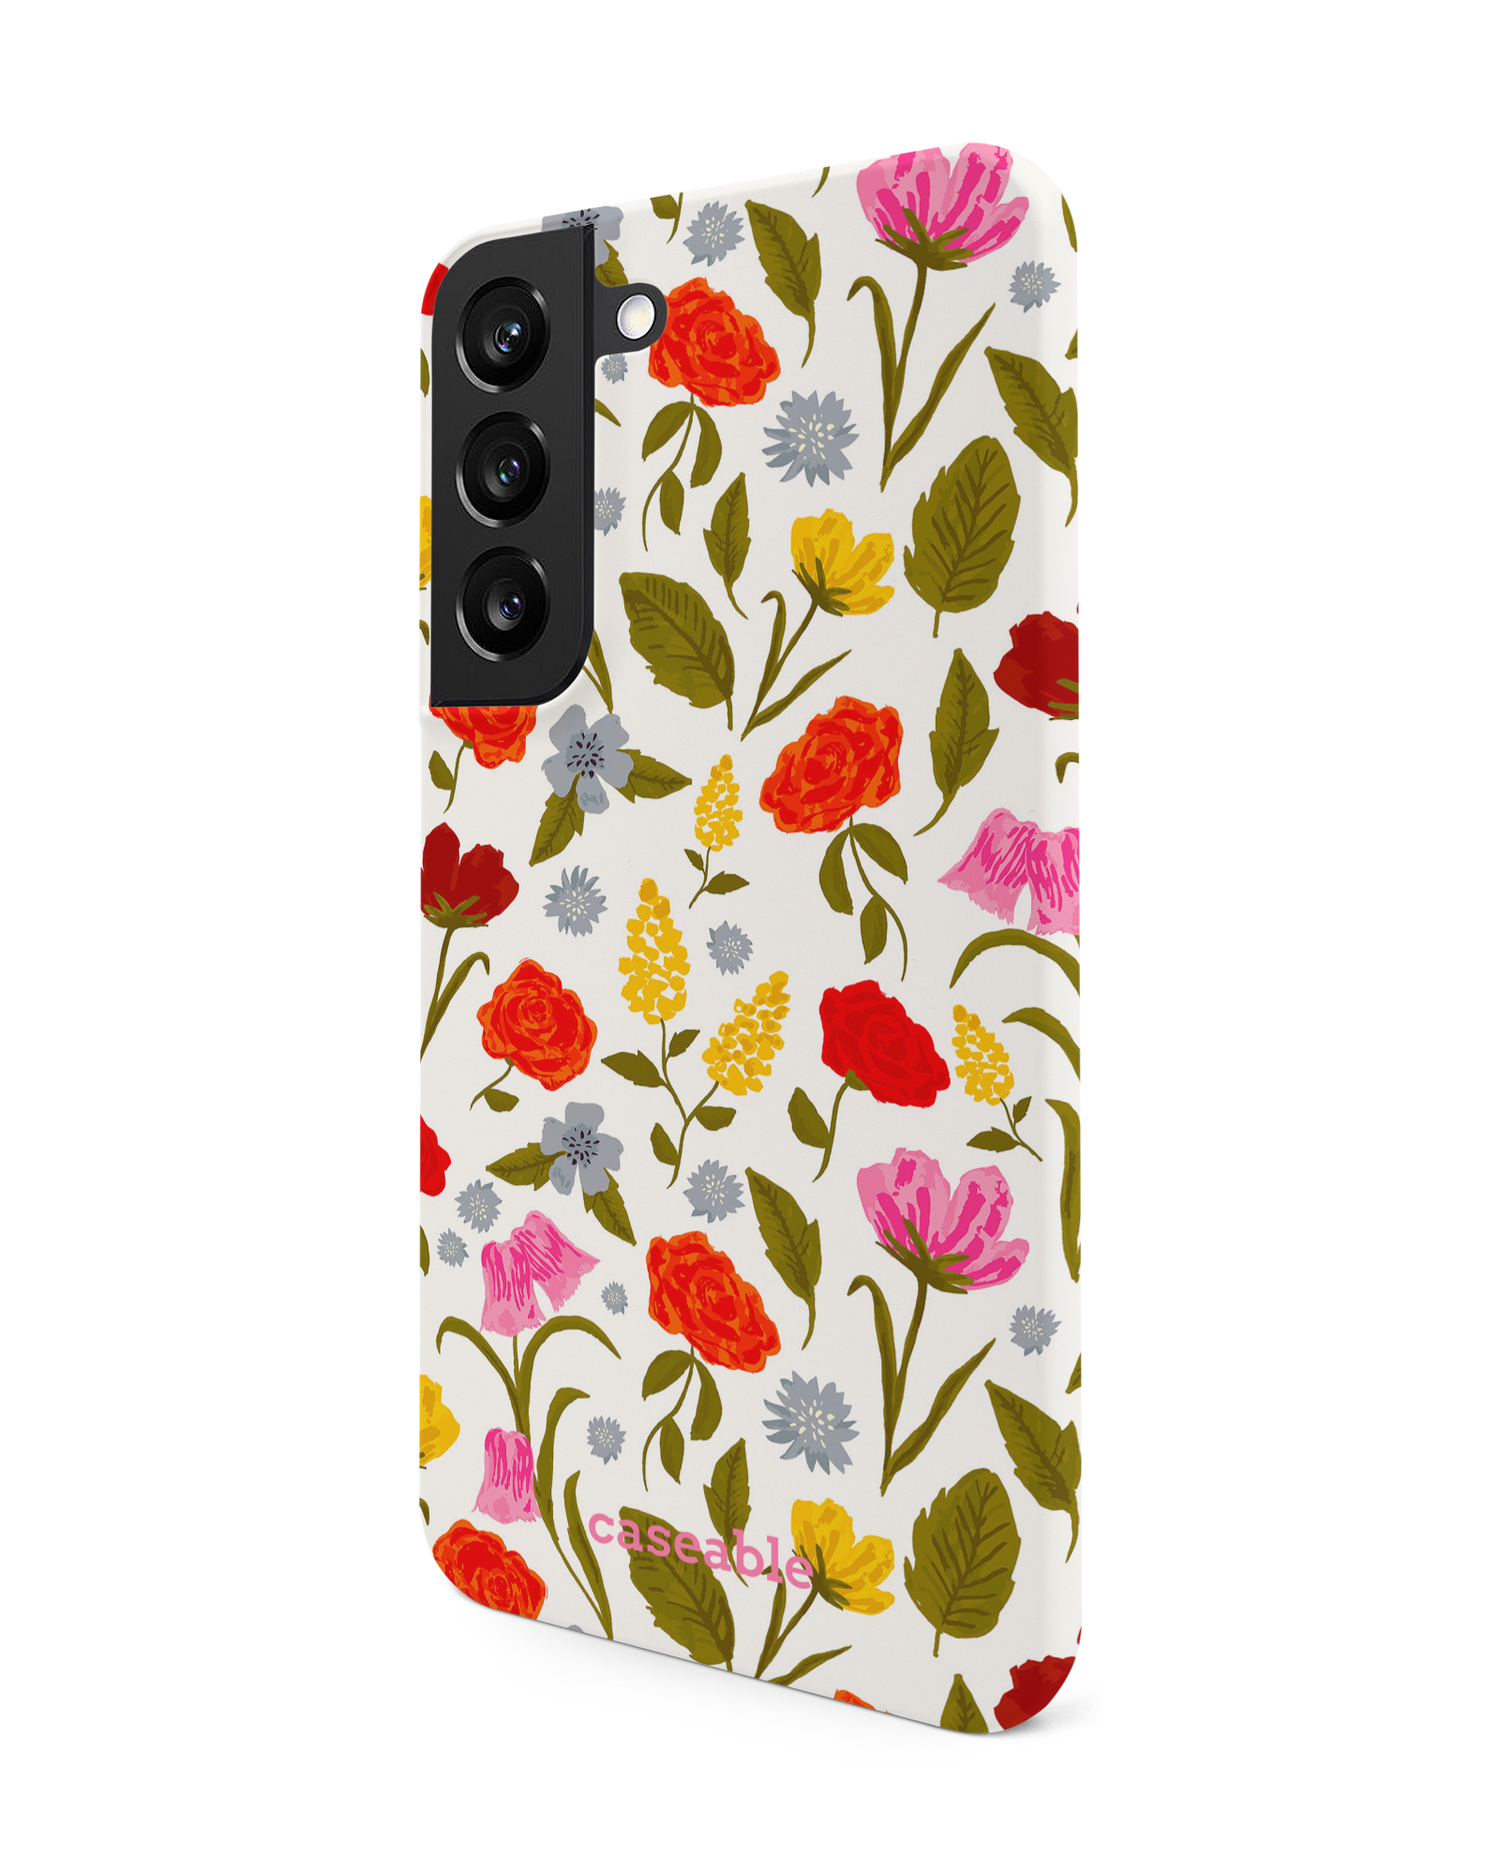 Botanical Beauties Hard Shell Phone Case Samsung Galaxy S22 5G: View from the right side